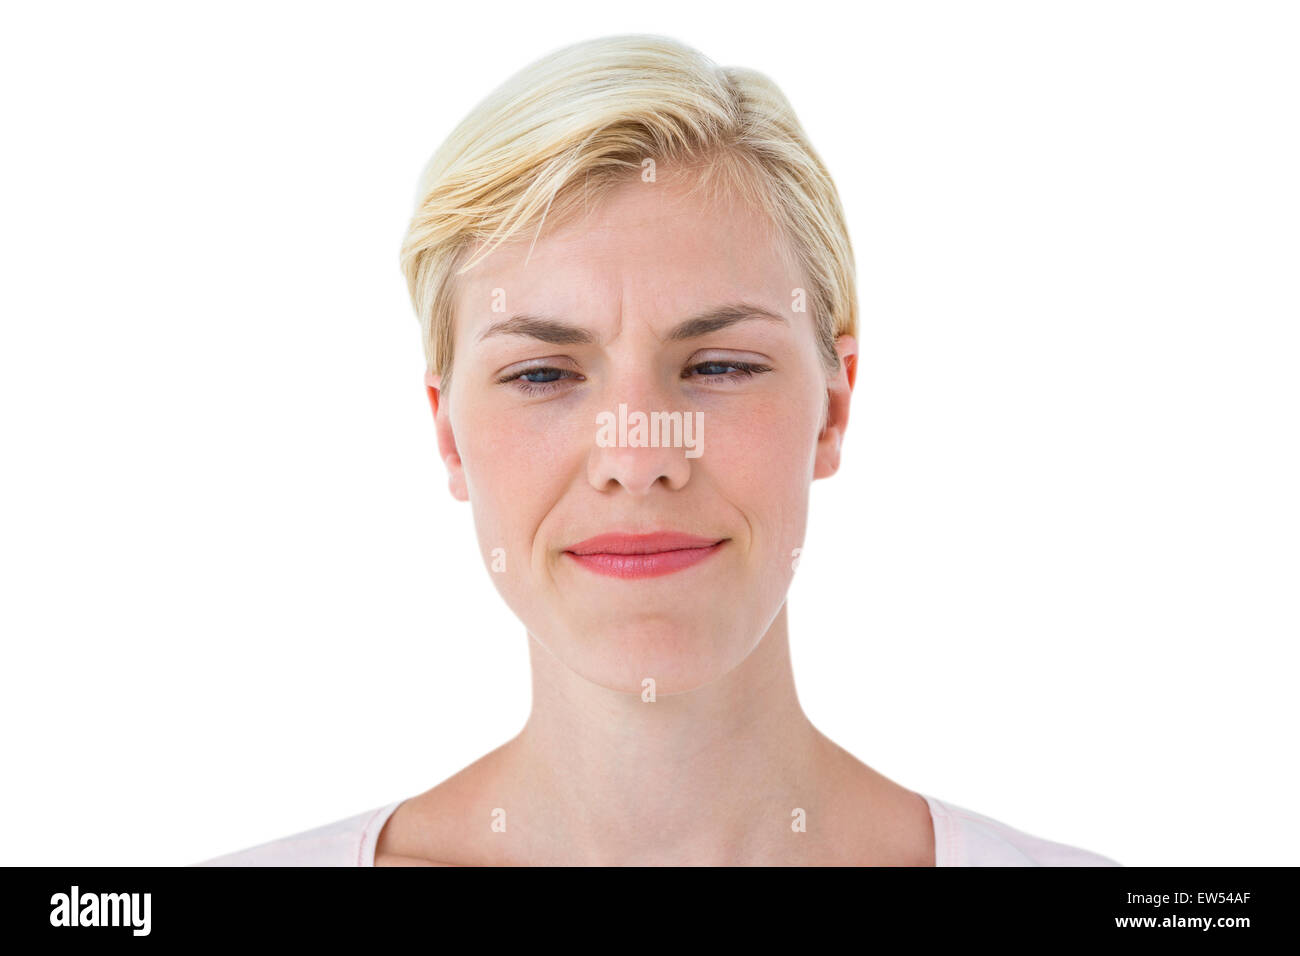 Serious woman frowning Stock Photo